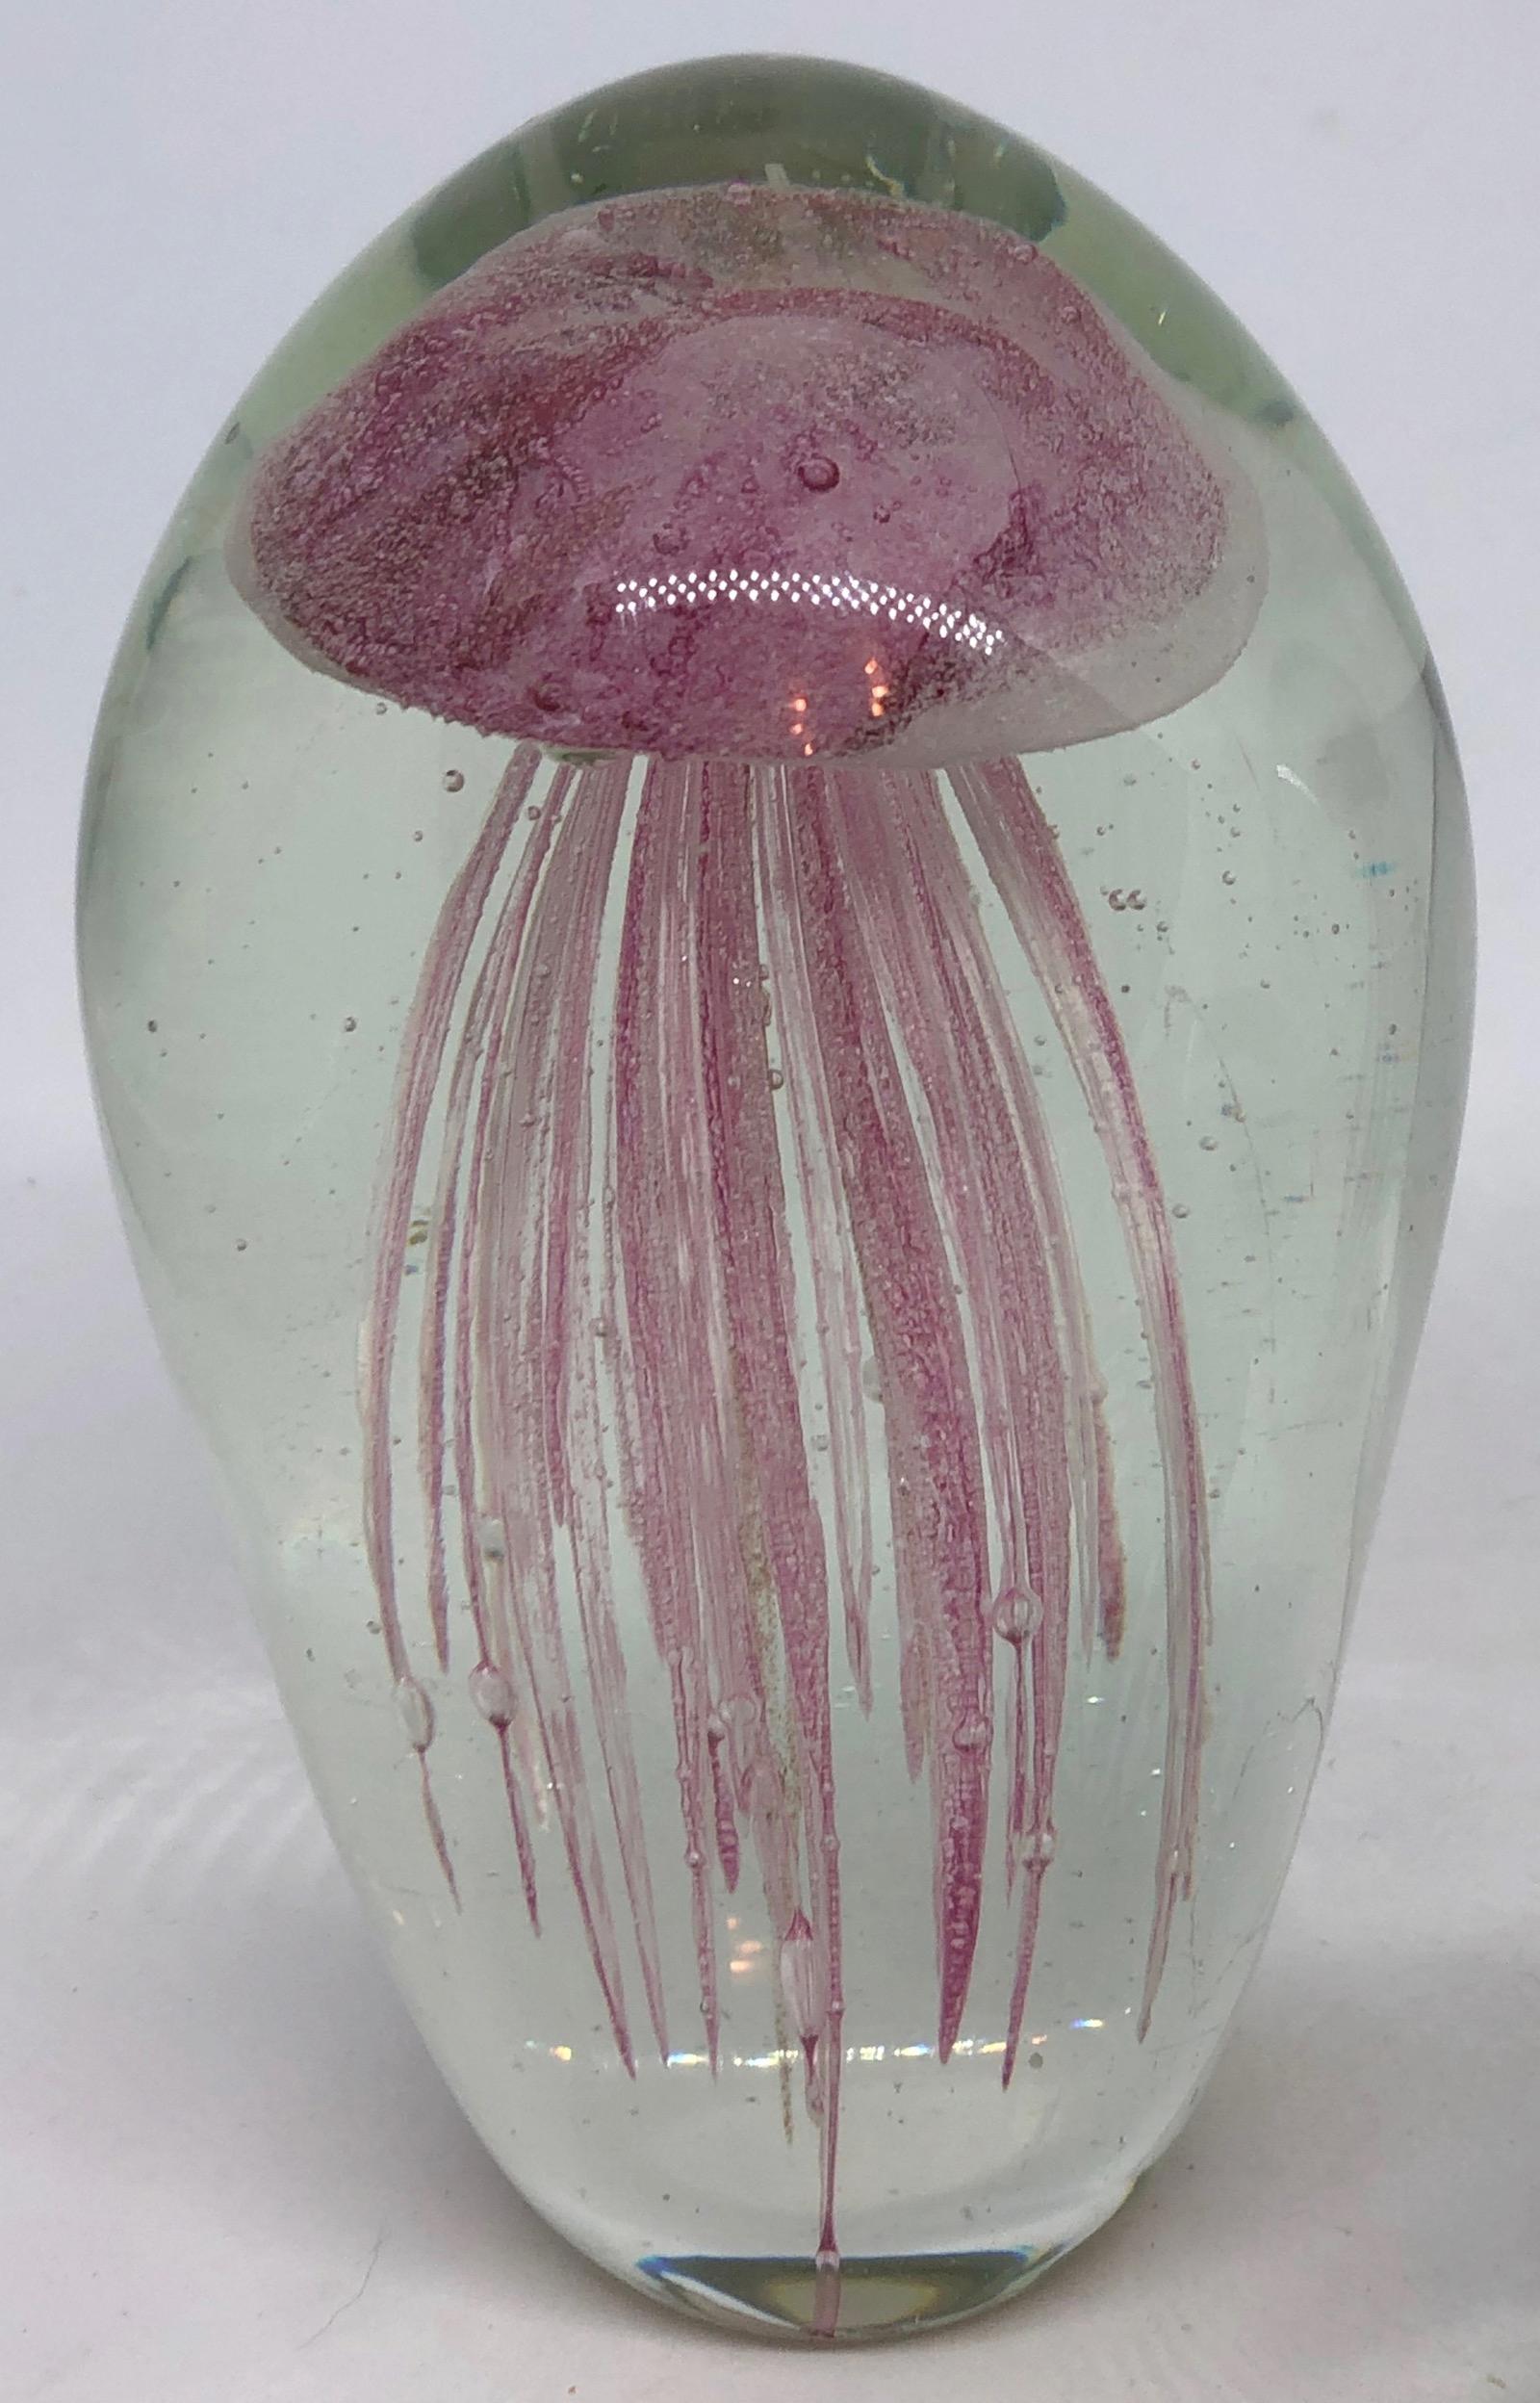 Beautiful set of three Murano hand blown aquarium design Italian art glass paper weights. Showing Jelly Fish inside, in different colors, floating on controlled bubbles. Colors are a dark pink, black and white and one in green. Tallest measure 6